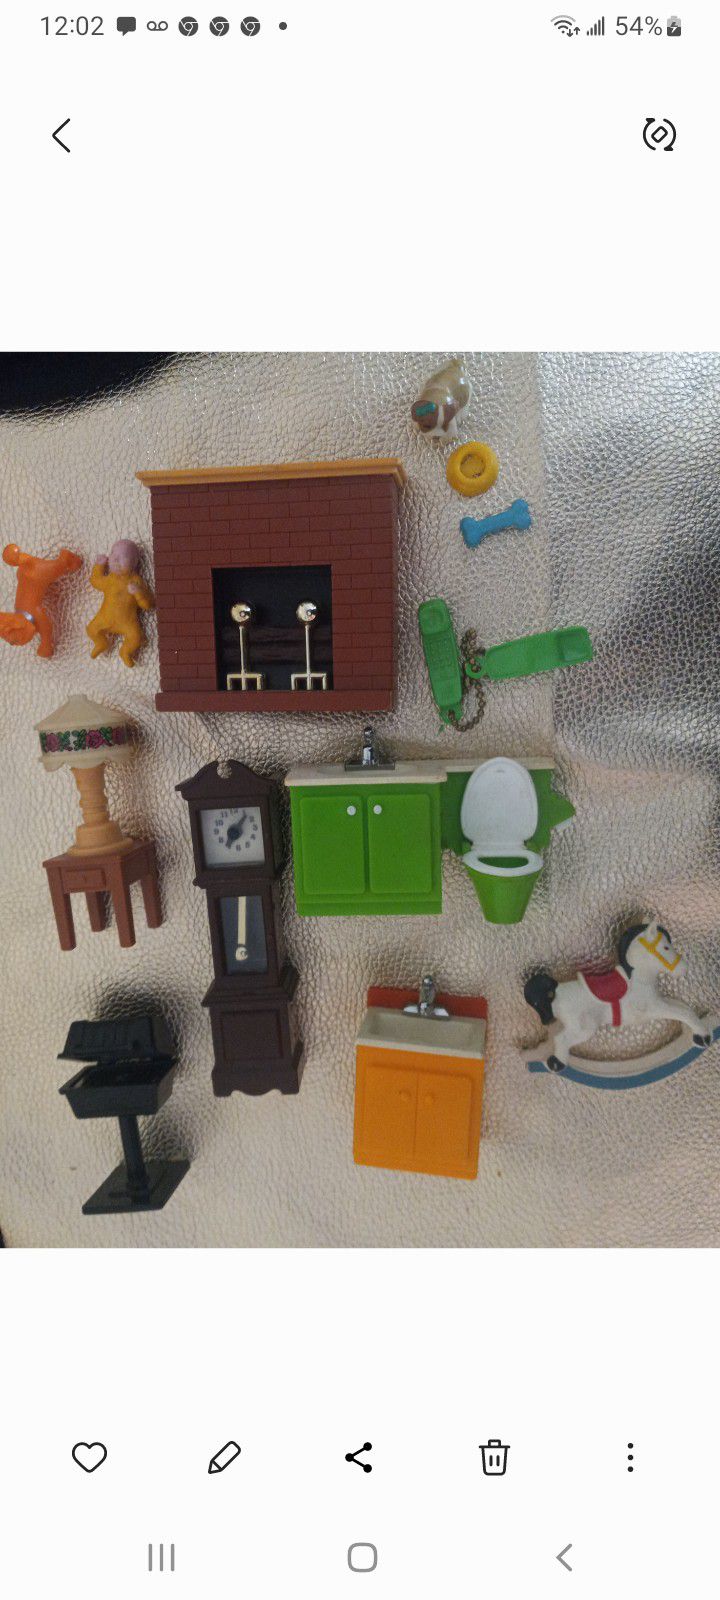 Vintage 1980s  Doll House Furniture  .13 Peices 10$